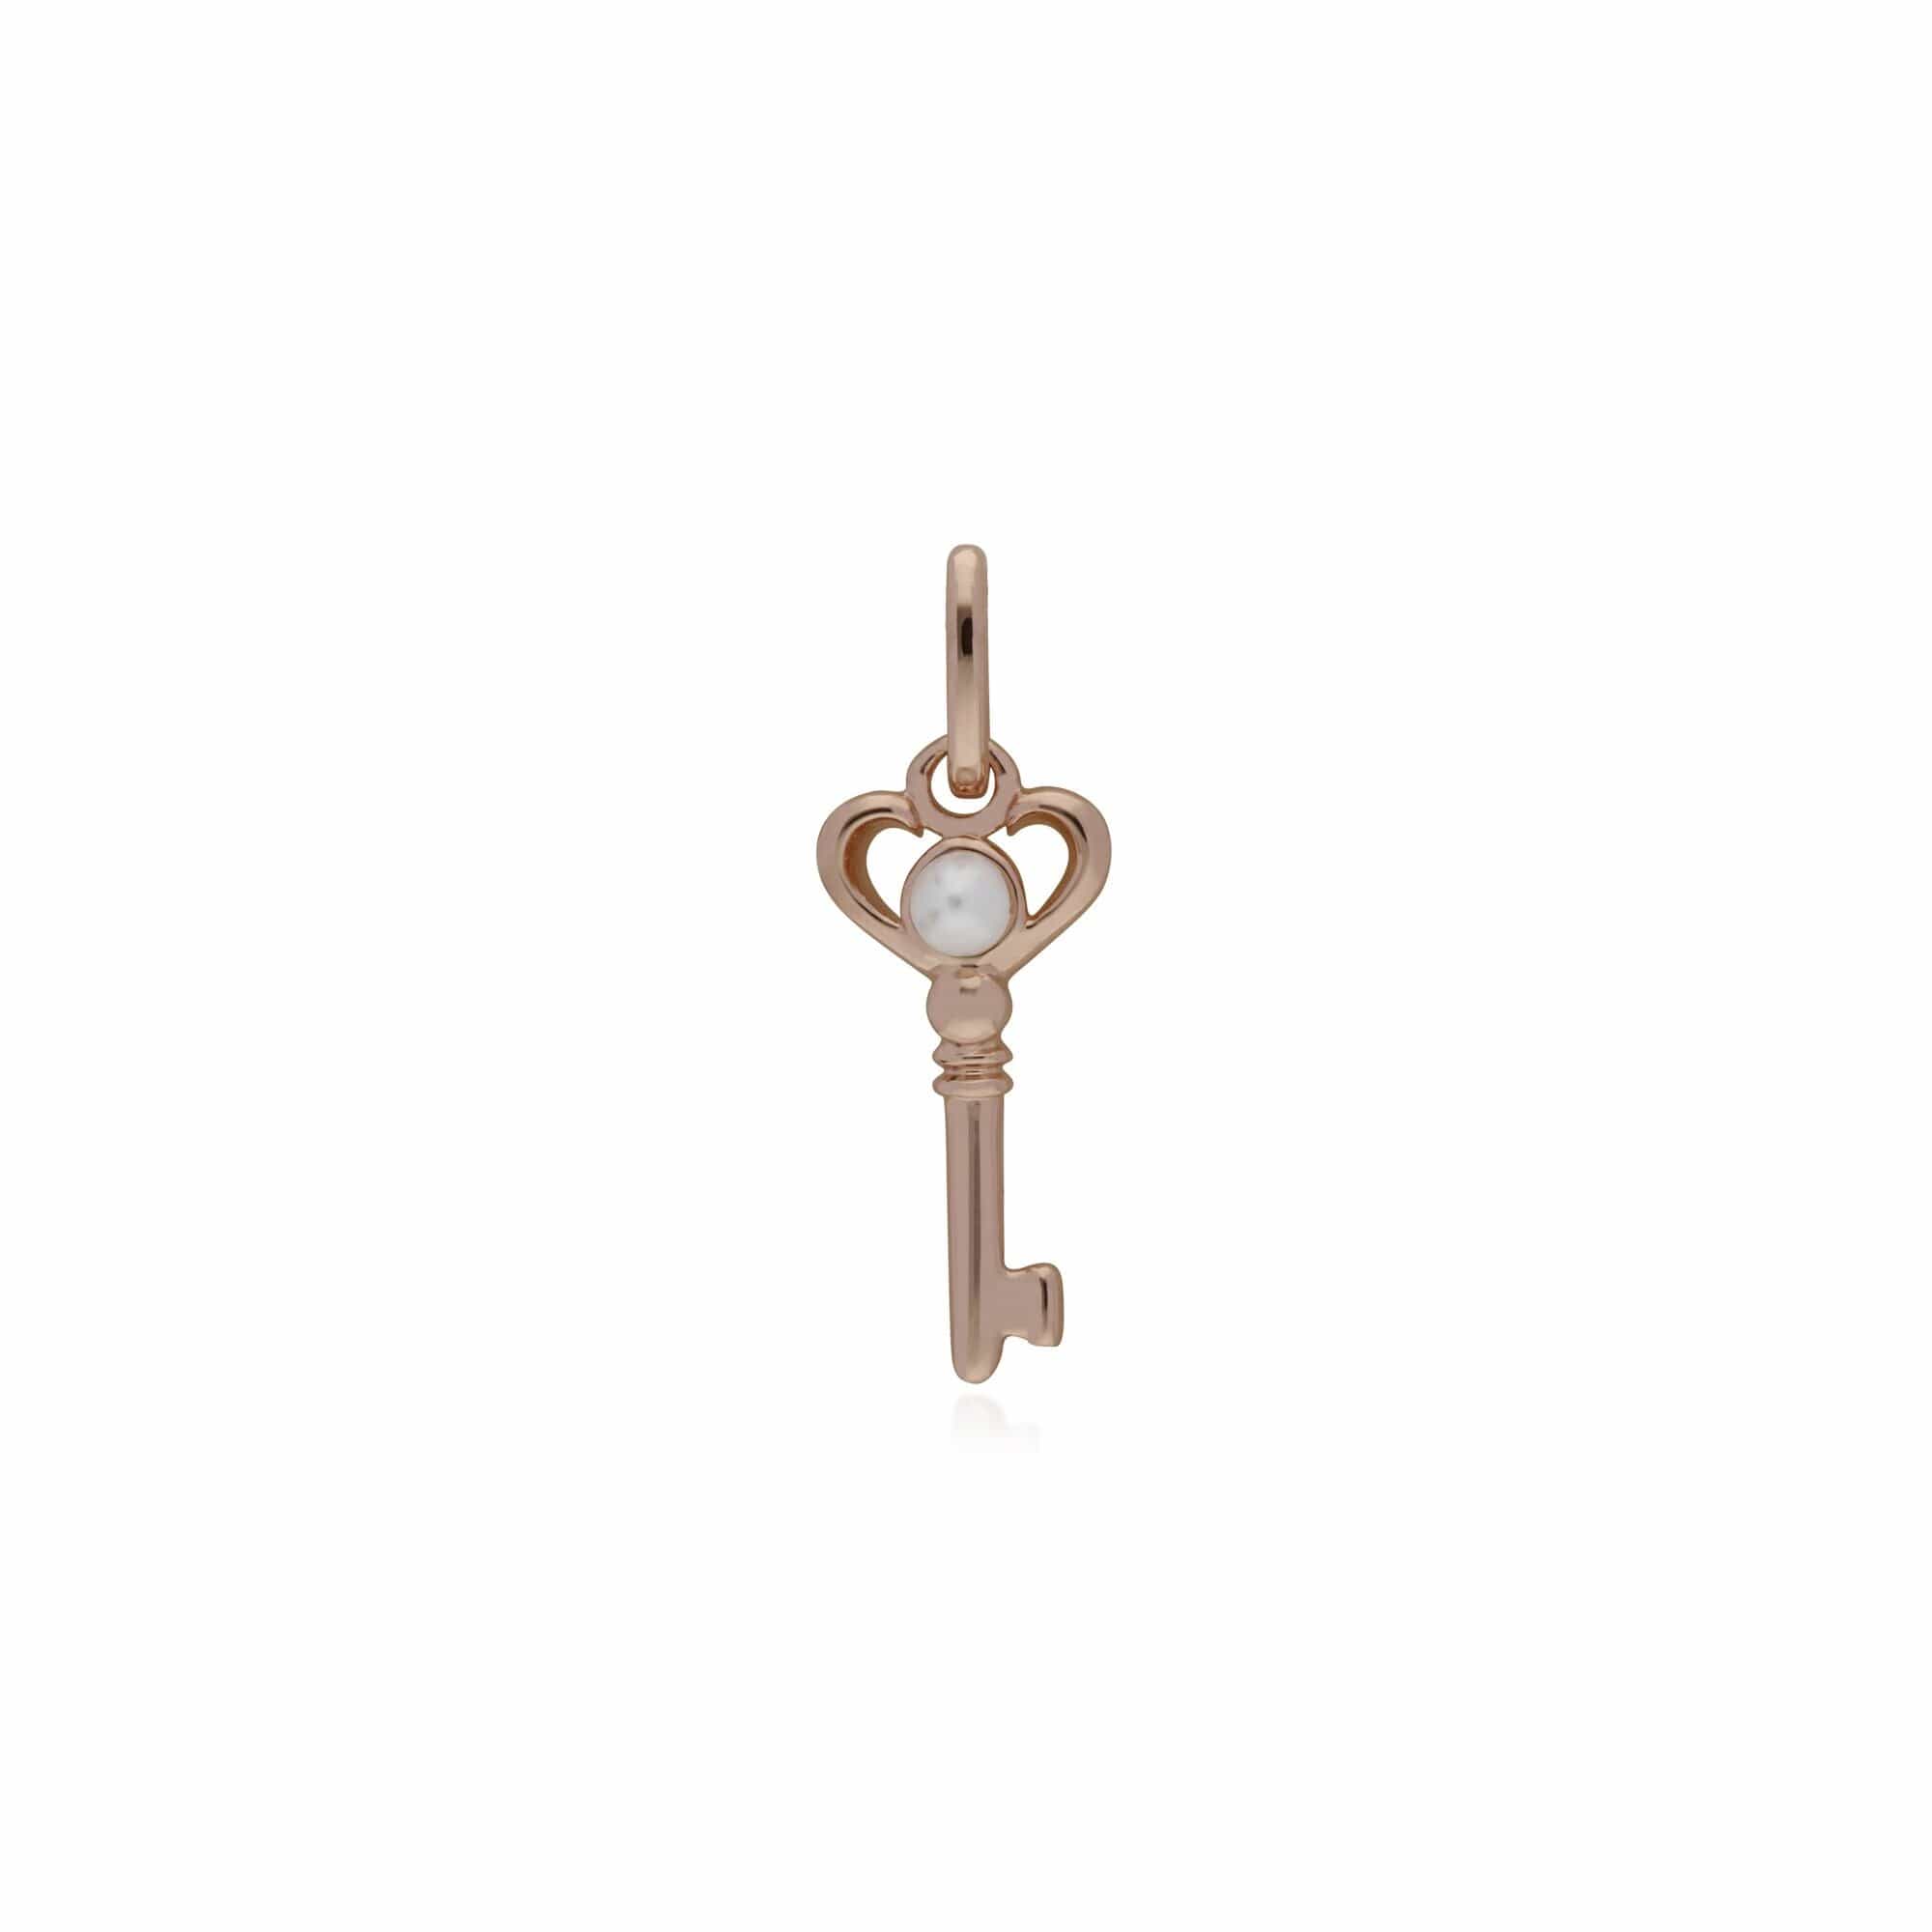 270P025701925-270P026901925 Classic Plain Heart Lock Pendant & Pearl Charm in Rose Gold Plated 925 Sterling Silver 2